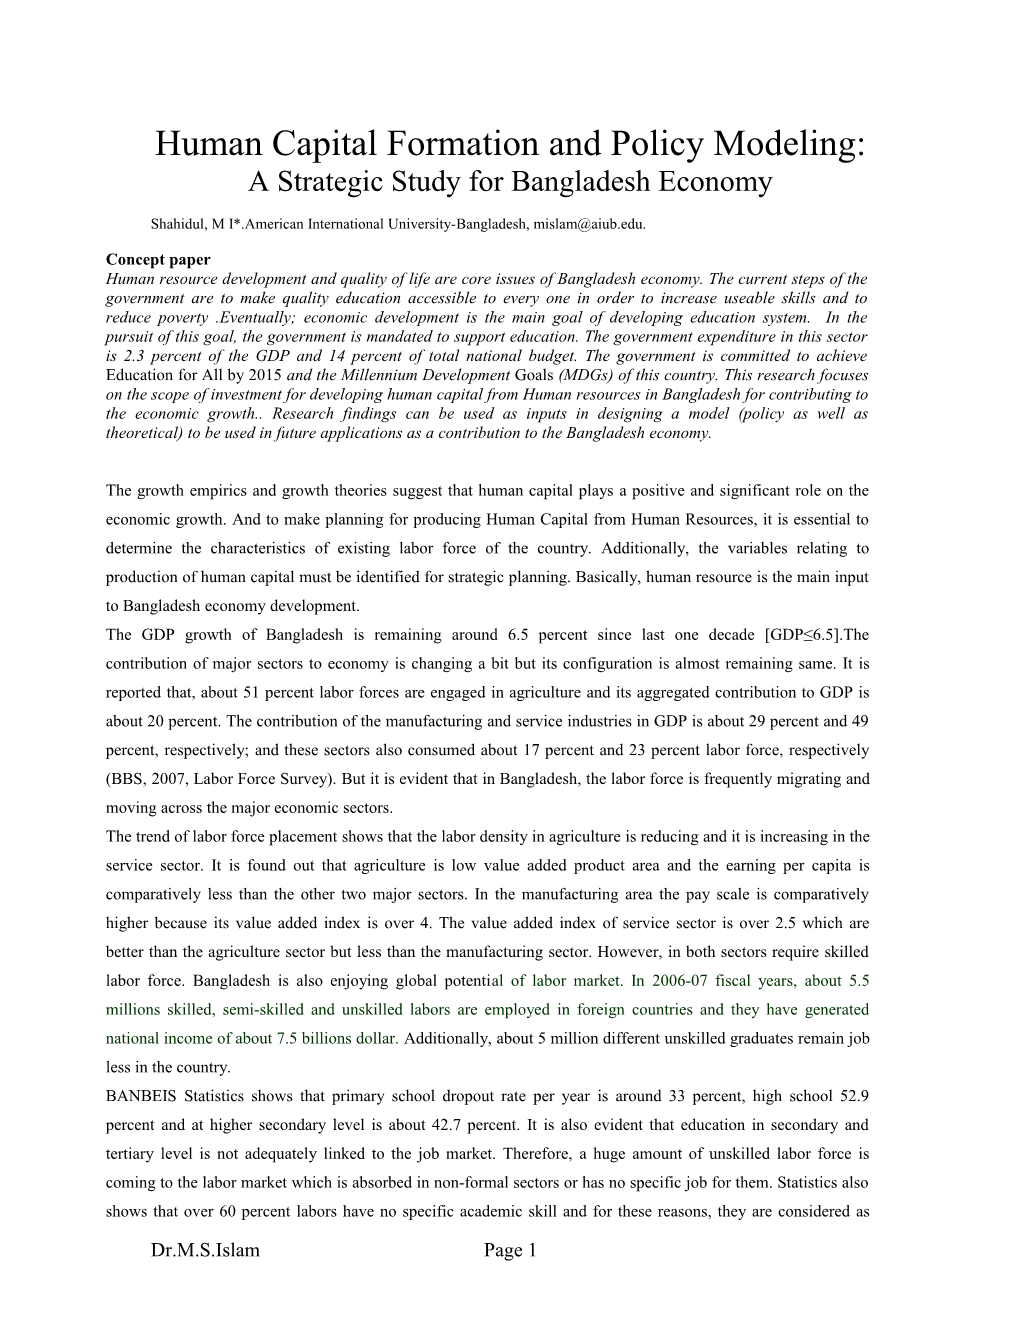 Human Capital Formationand Policy Modeling: a Strategic Study for Bangladesh Economy